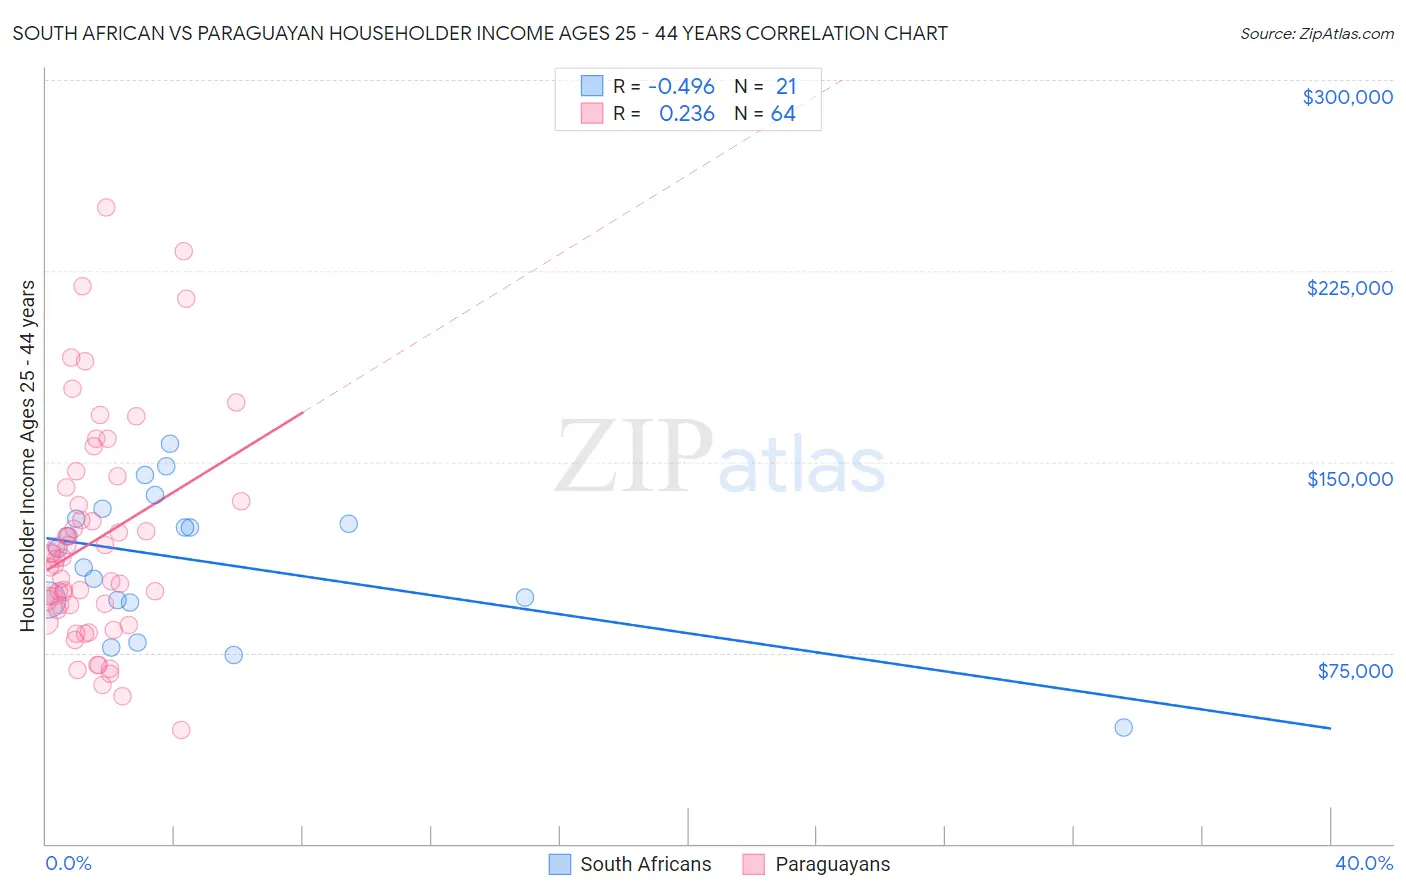 South African vs Paraguayan Householder Income Ages 25 - 44 years